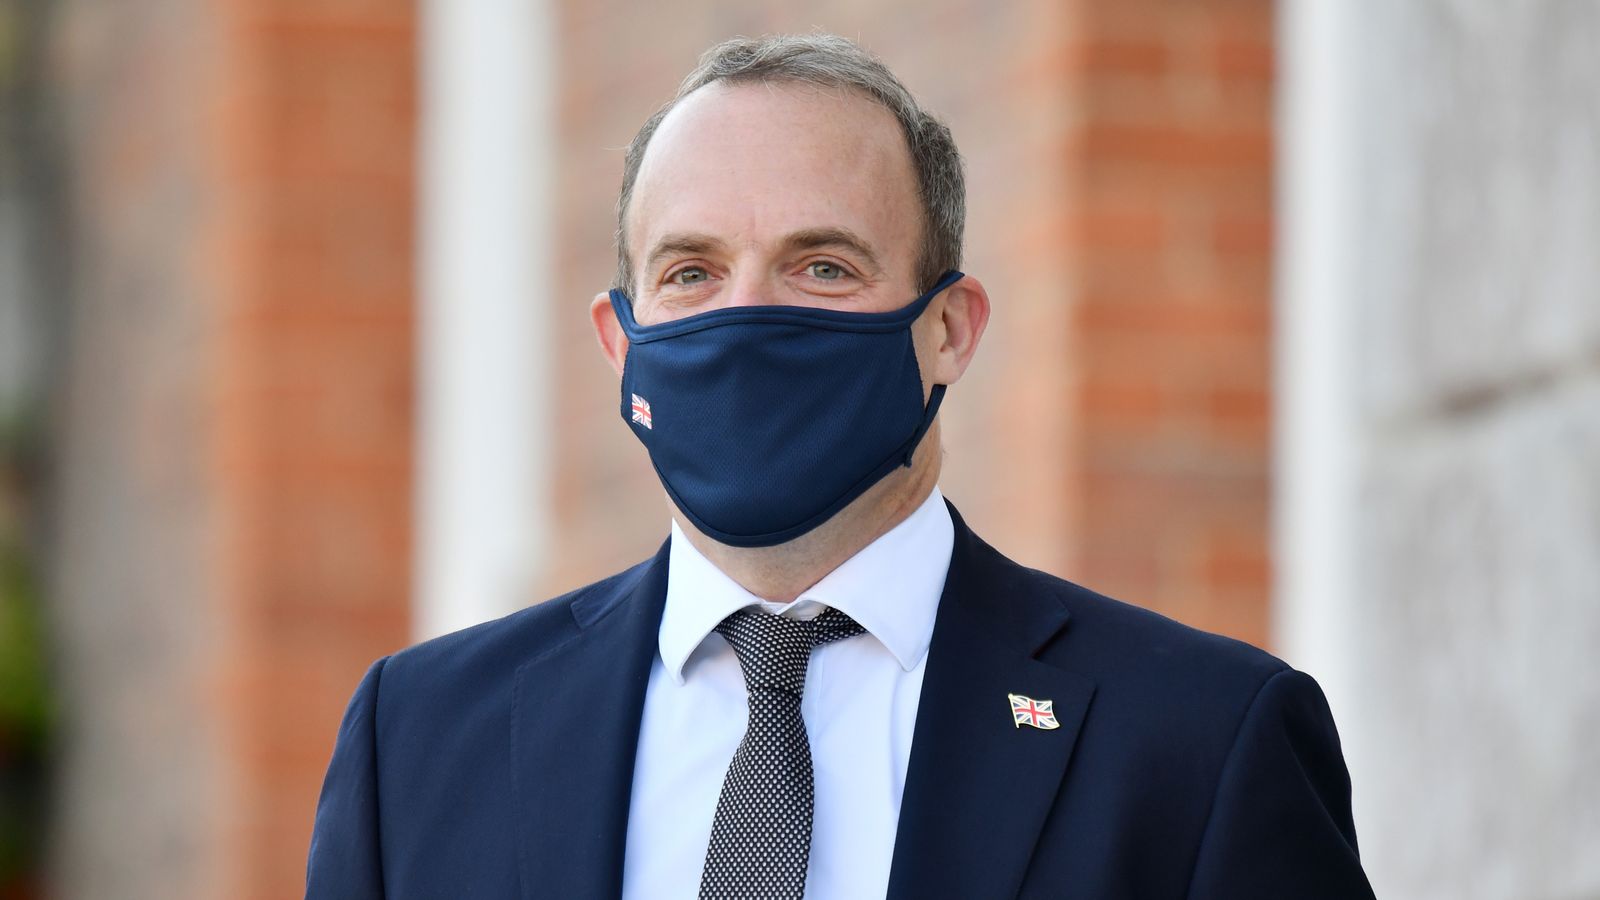 Coronavirus: Foreign Secretary Dominic Raab self-isolating after 'close contact' COVID-positive person